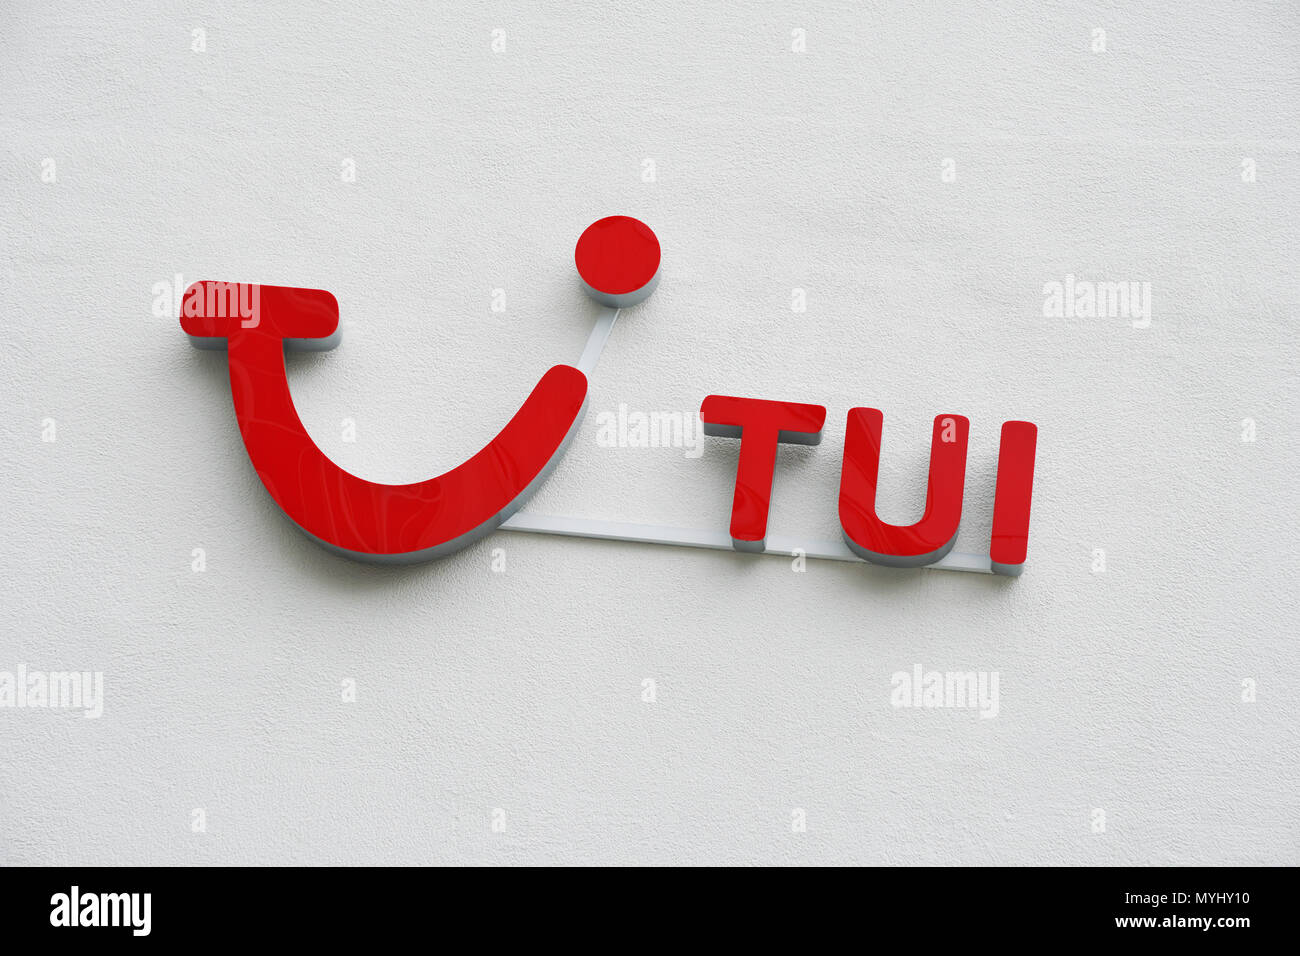 Hannover, Germany - June 6, 2018: TUI logo and brand sign on wall. TUI Group is the largest travel and tourism company in the world, headquartered in Hannover. Stock Photo